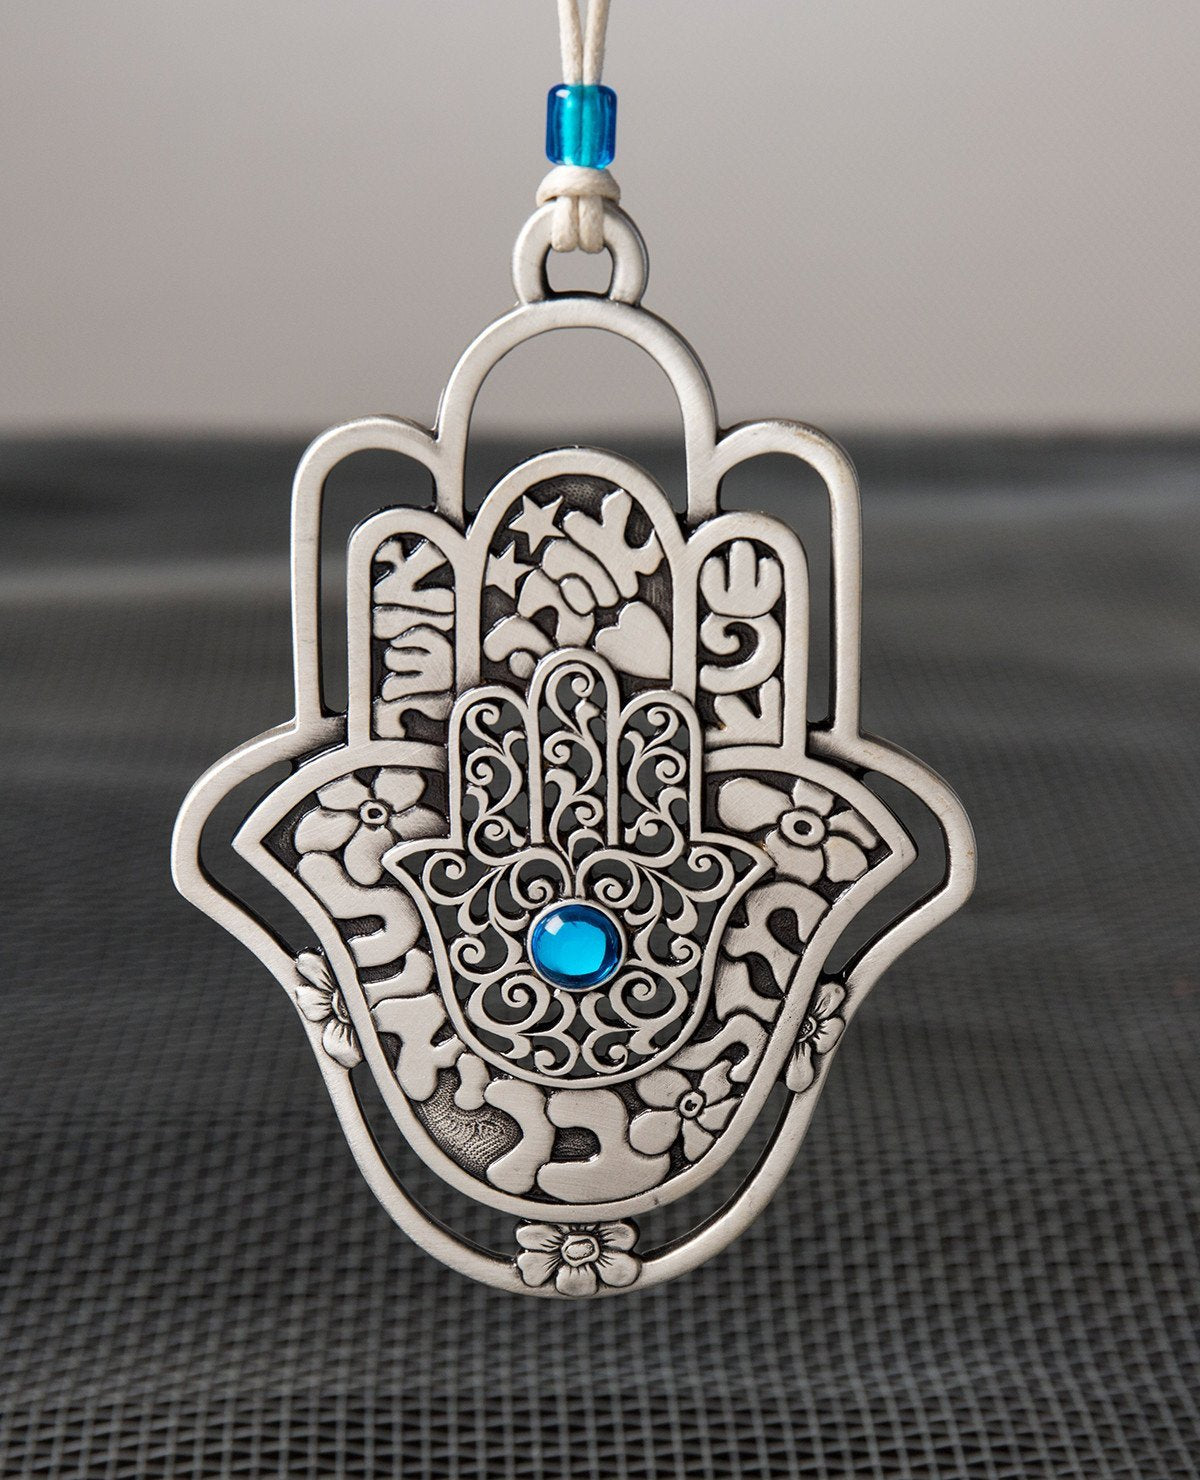 A hanging Hamsa ornament, designed in exquisite beauty: a Hamsa within a Hamsa within a Hamsa. The outer one - a hollow frame decorated by delicate flowers. The middle one - all embossed words of blessing - for abundance, luck, health, happiness and love. The inner one - filigree decoration with a blue stone at the center. The ornament is coated in sterling silver and comes with a faux leather string deocorated by a blue bead. An impressive and very meaningful gift that is a pleasure to grant to our loved o